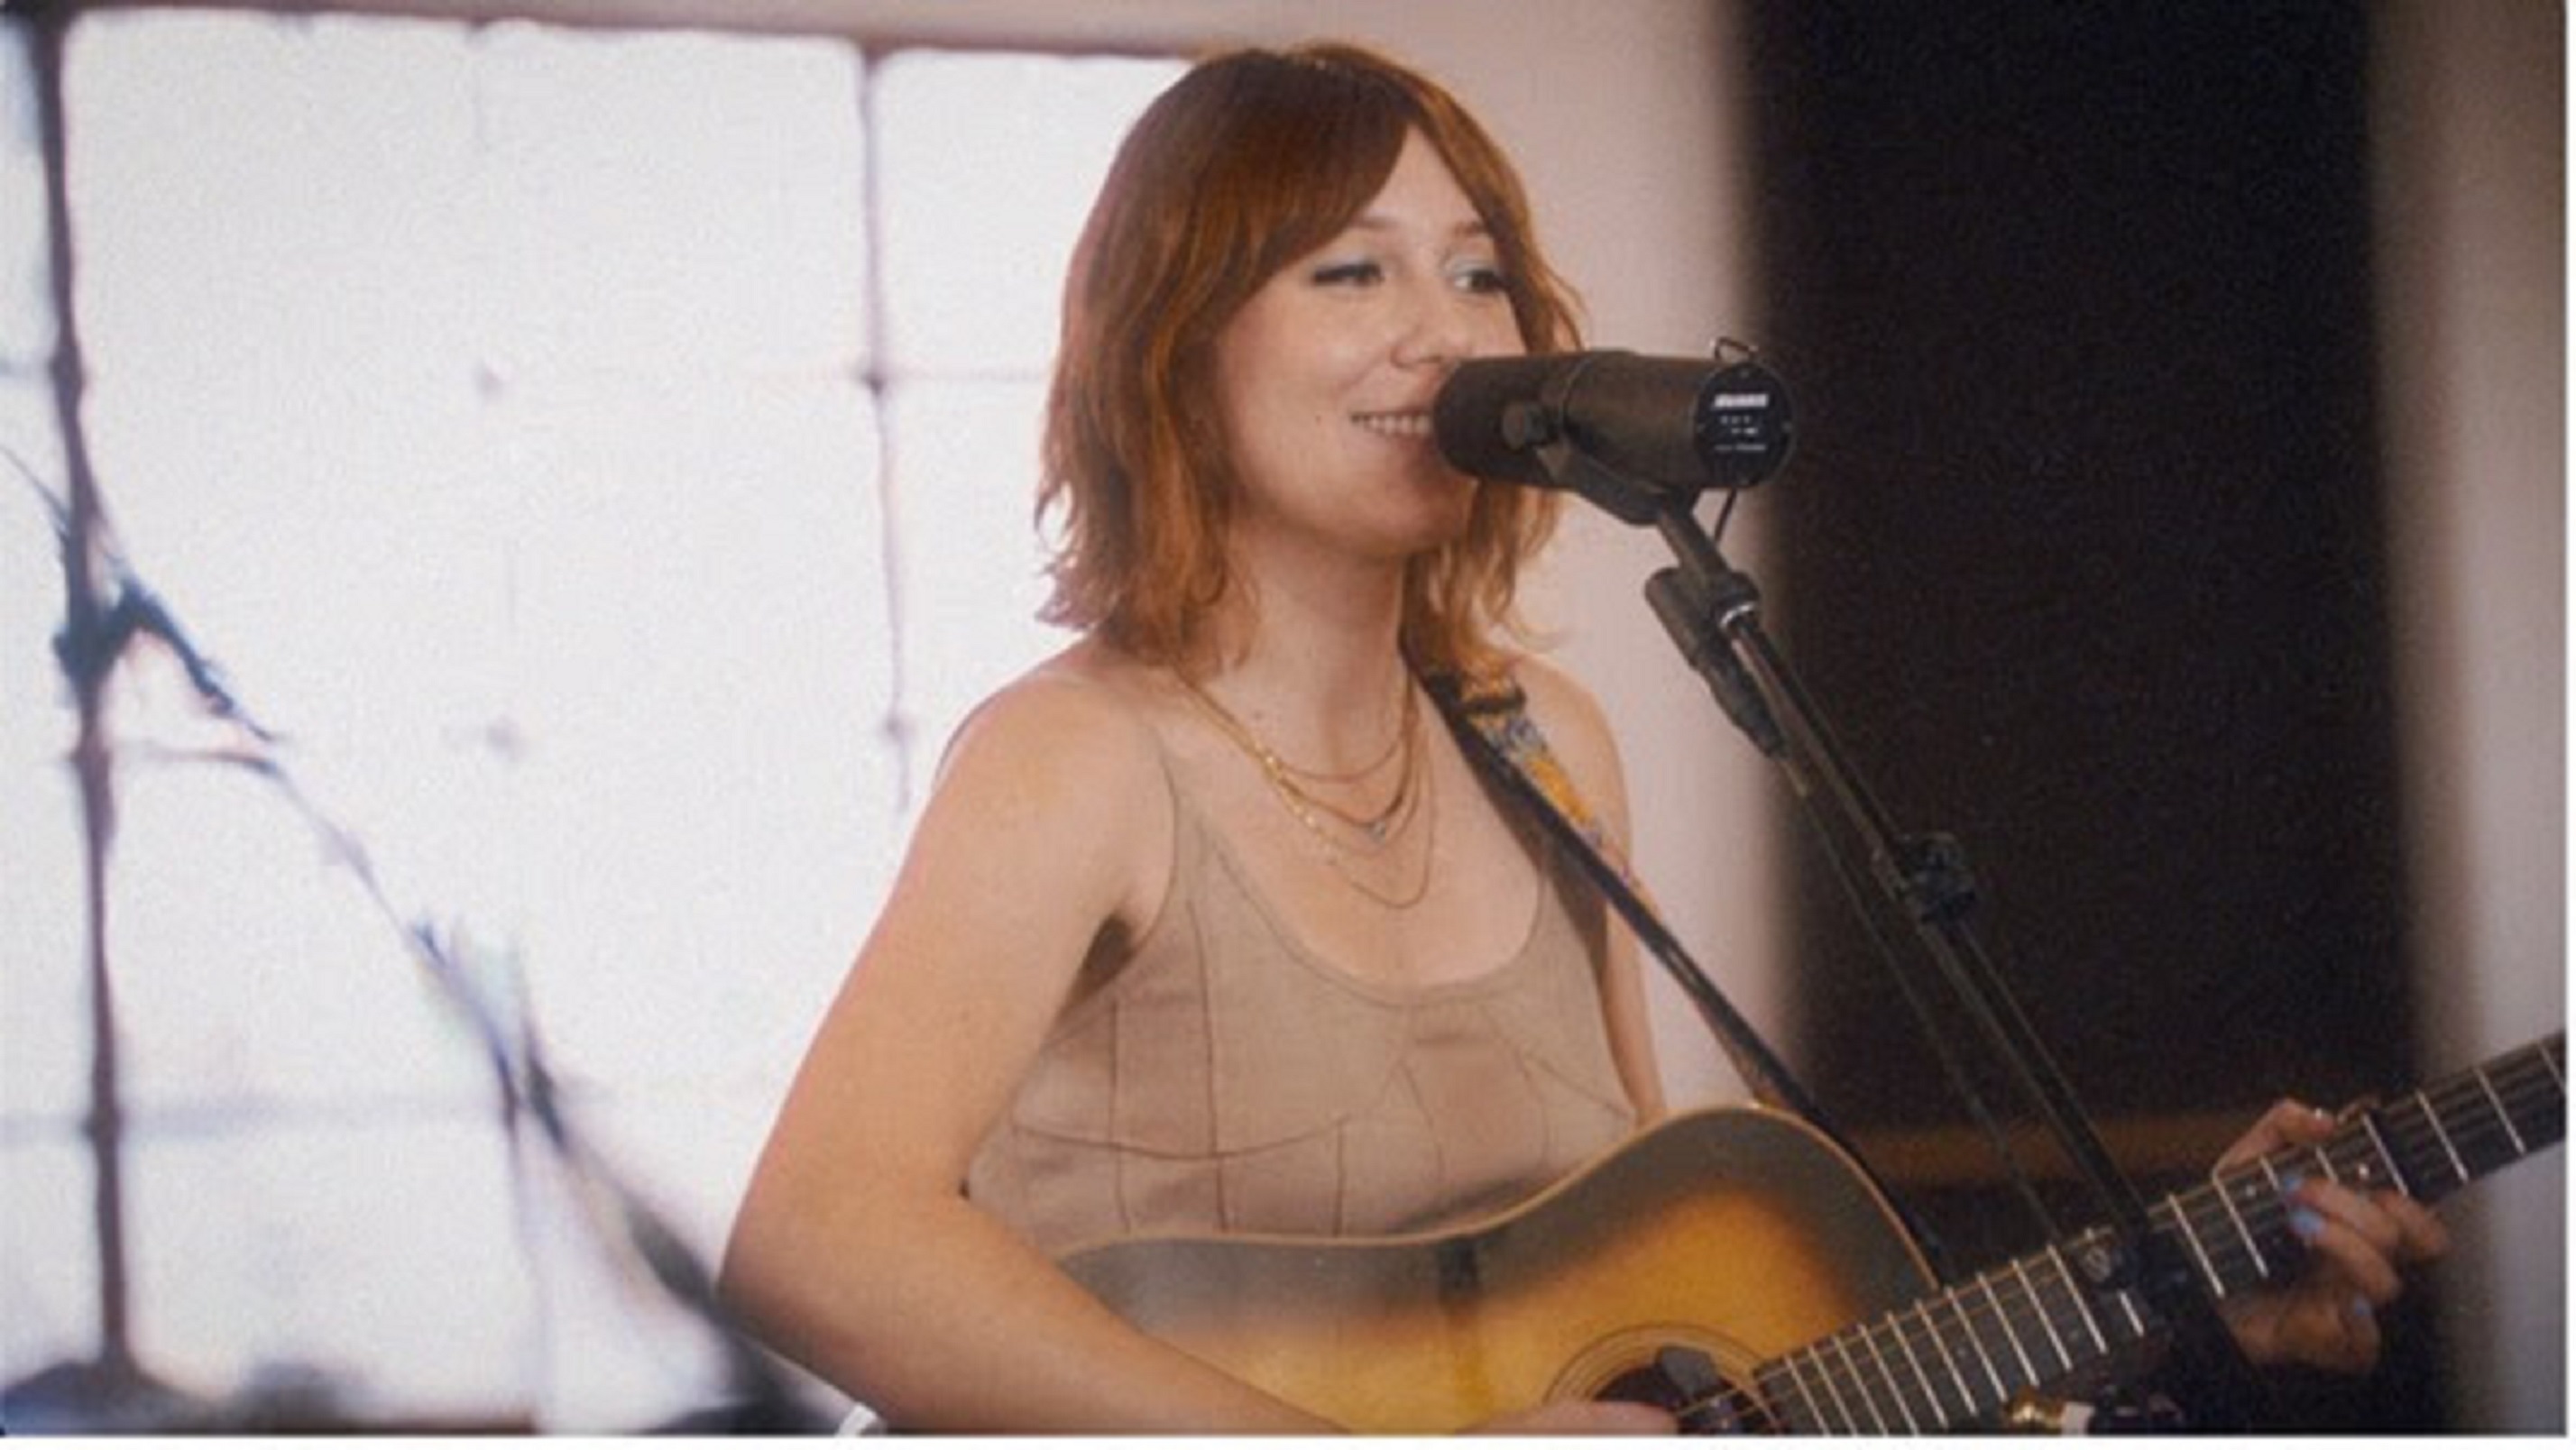 Molly Tuttle & Golden Highway release live performance video of “She’ll Change”